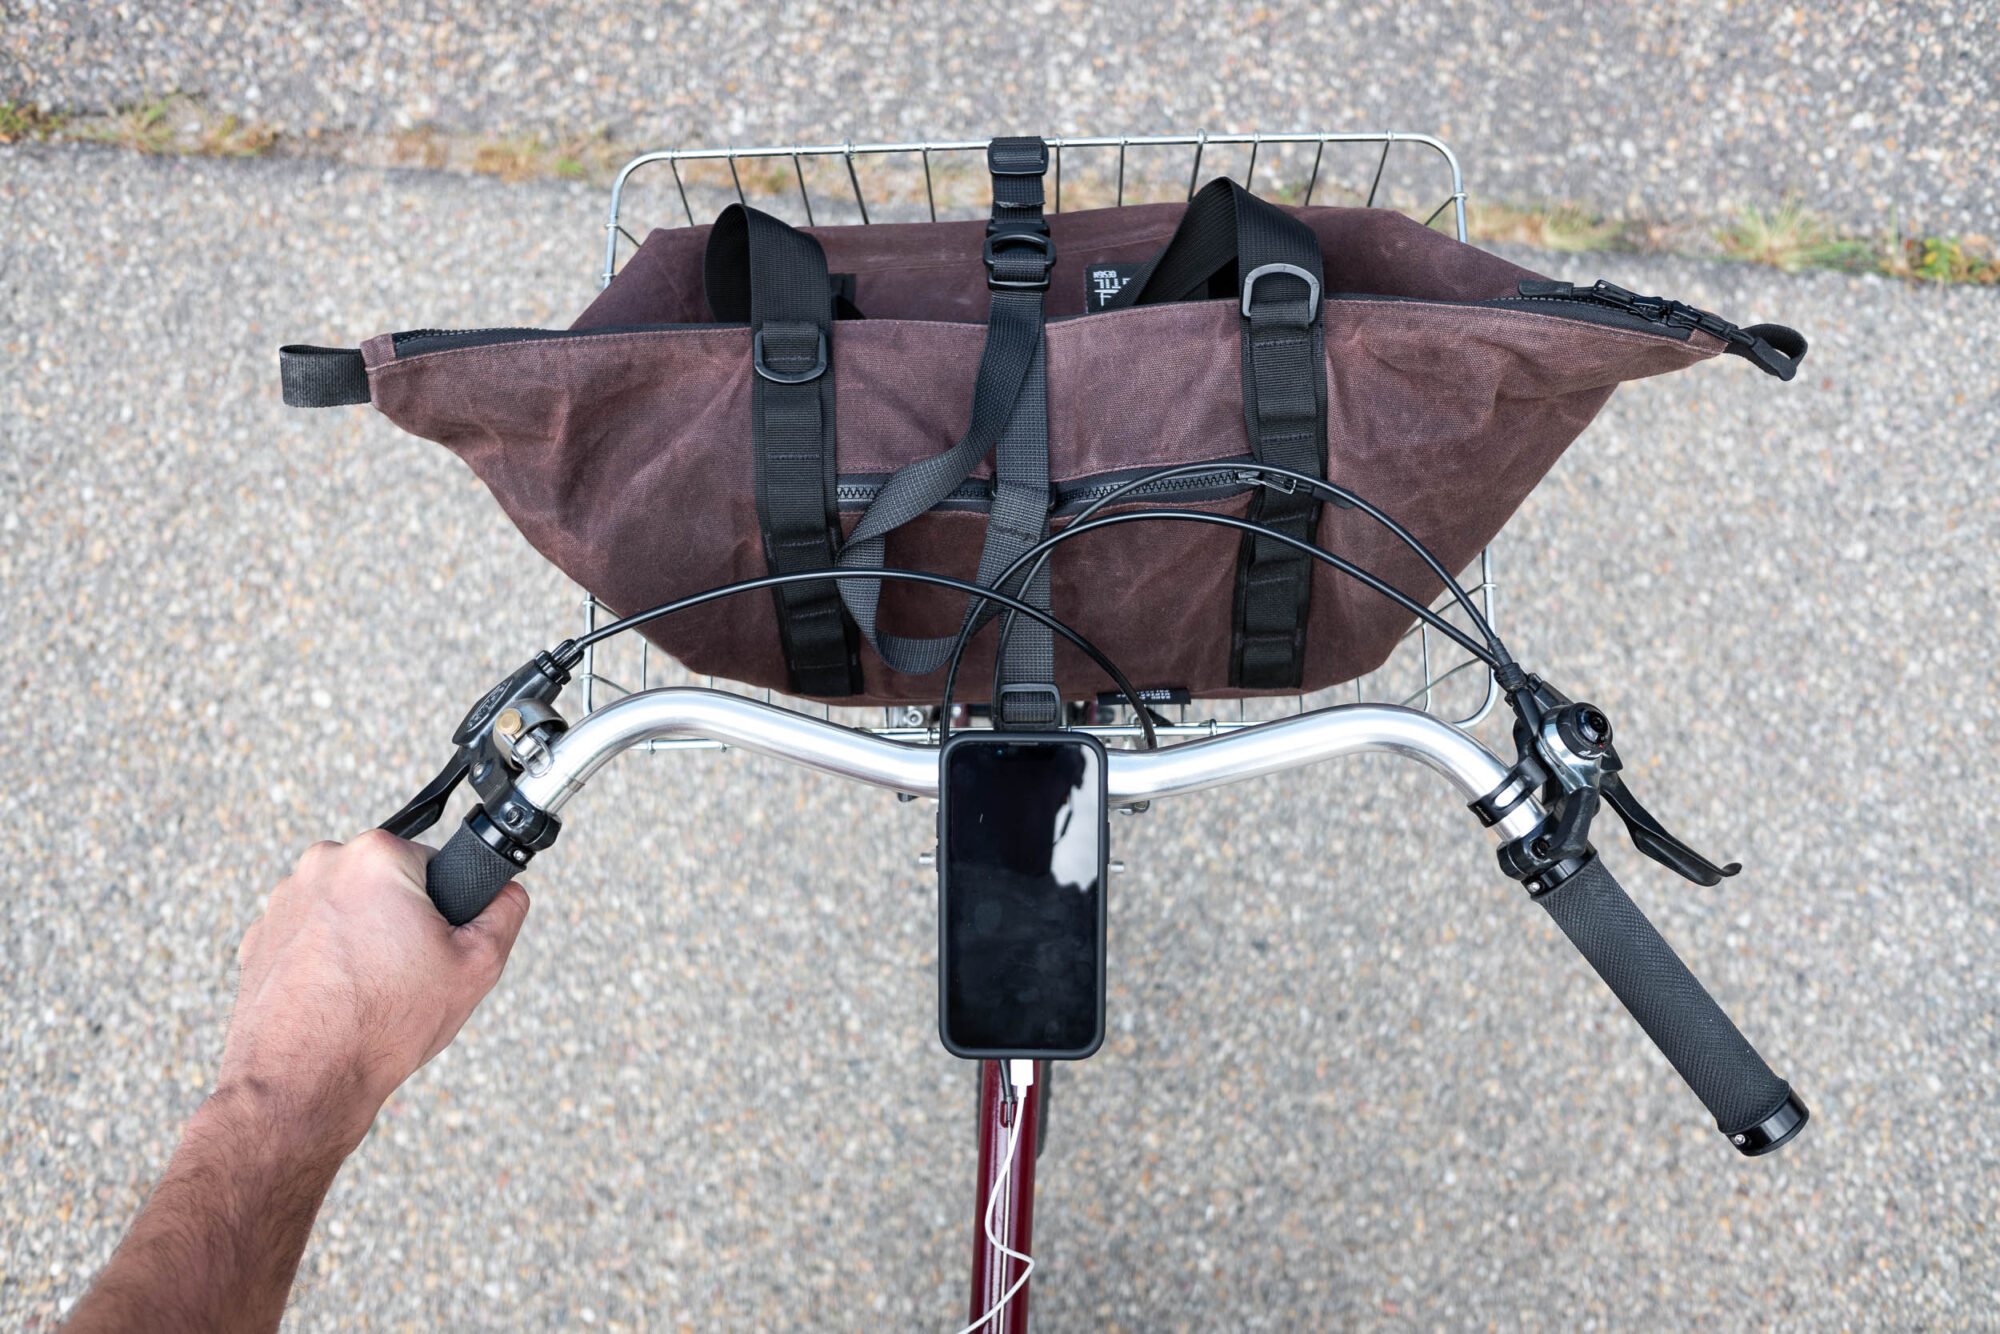 Peak Design Out Front Bike Mount Review